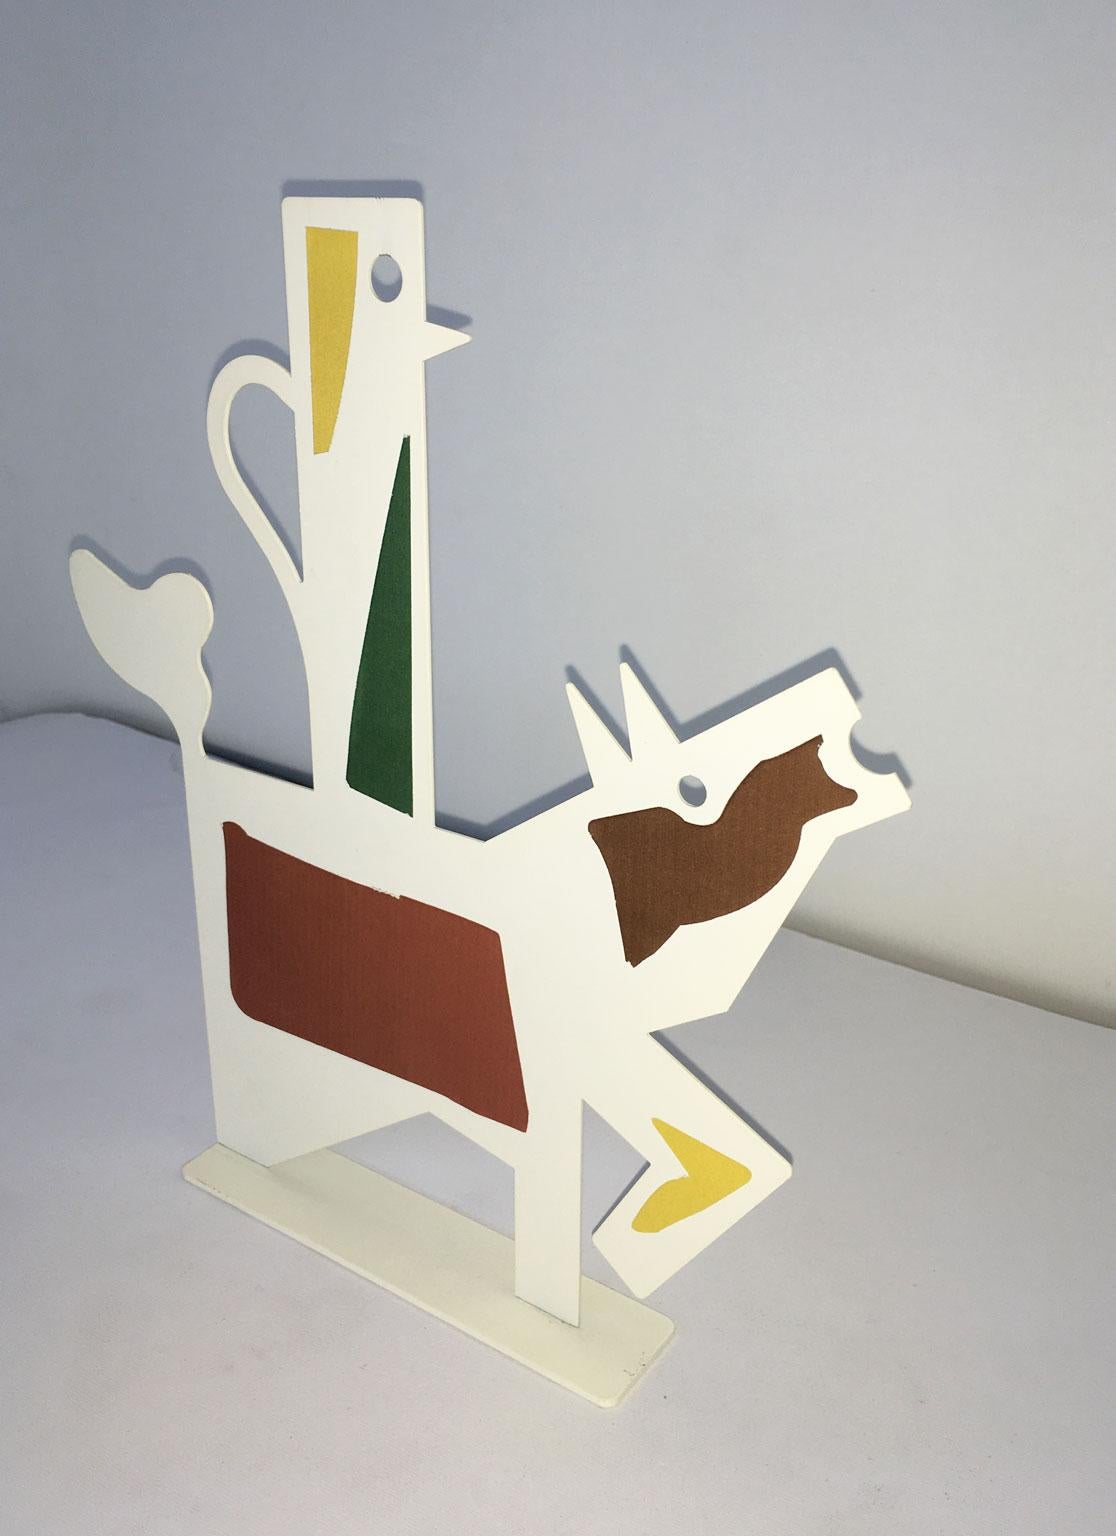 Italy 1980 Riccardo Dalisi White Painted Metal Sculpture Muccacaffè For Sale 19